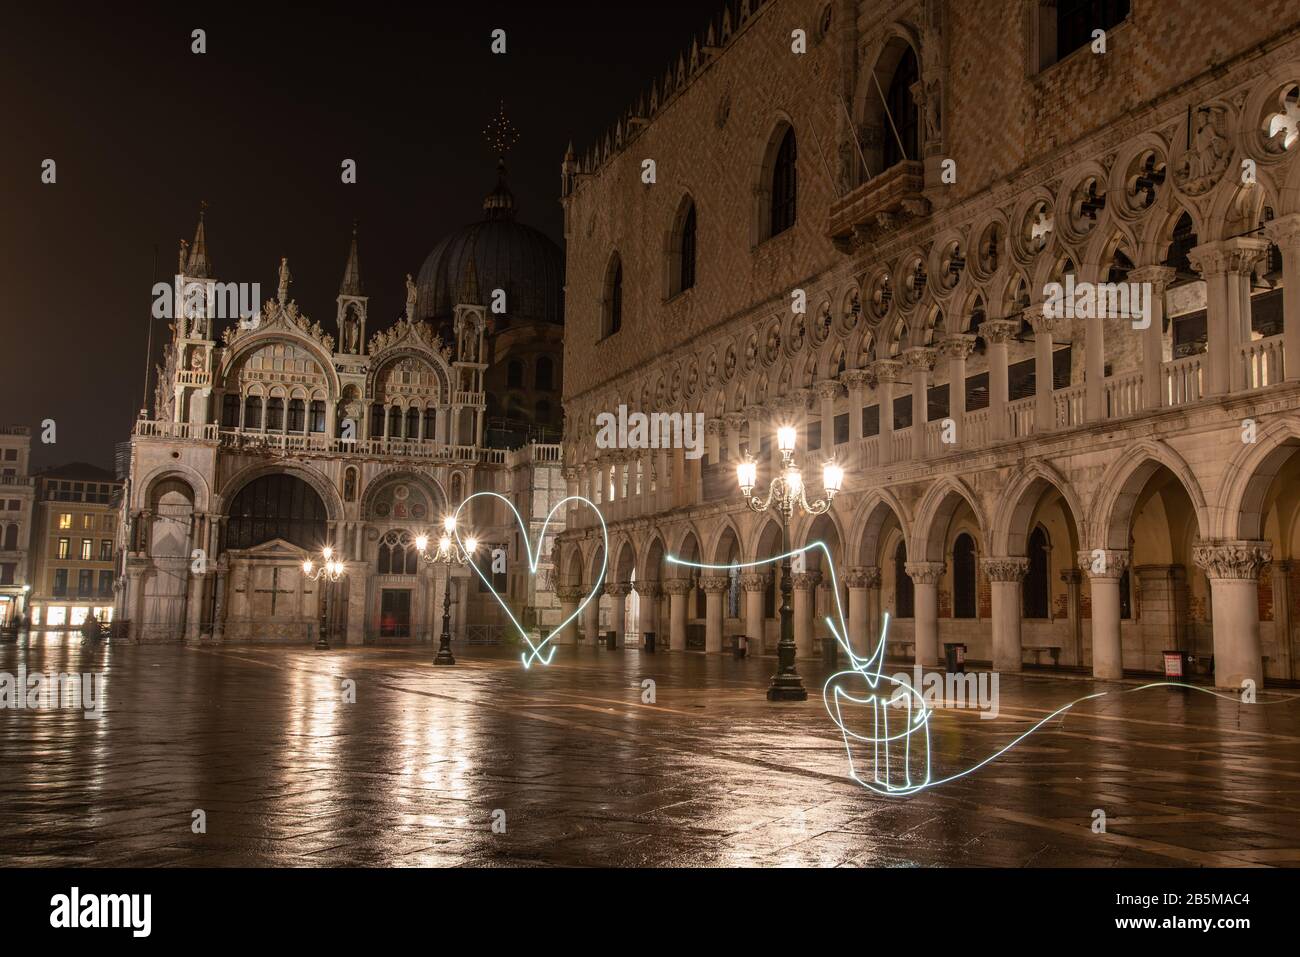 Writing with Light in front of the Illuminated Doge Palace on the Marks Square at Night, Venice/Italy Stock Photo